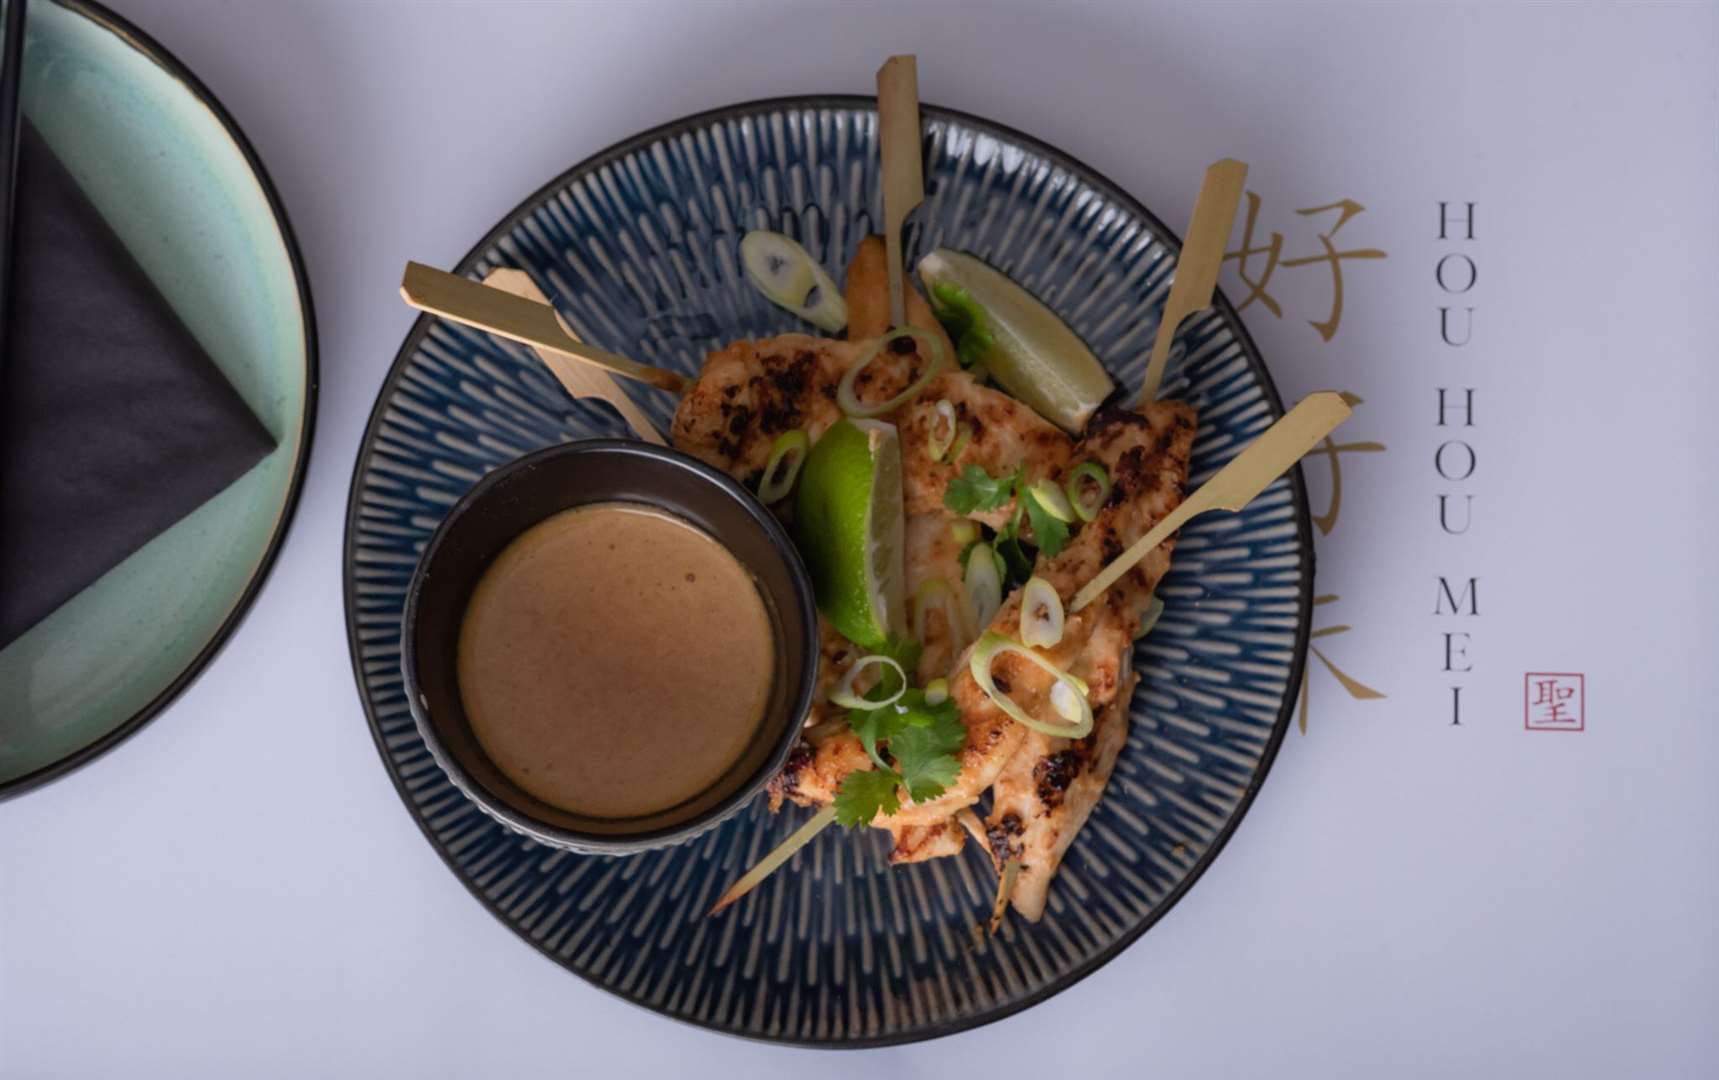 Chicken Satay Skewers with Peanut Dip. Pictures by: Richard Miller @ Highland-Photography.